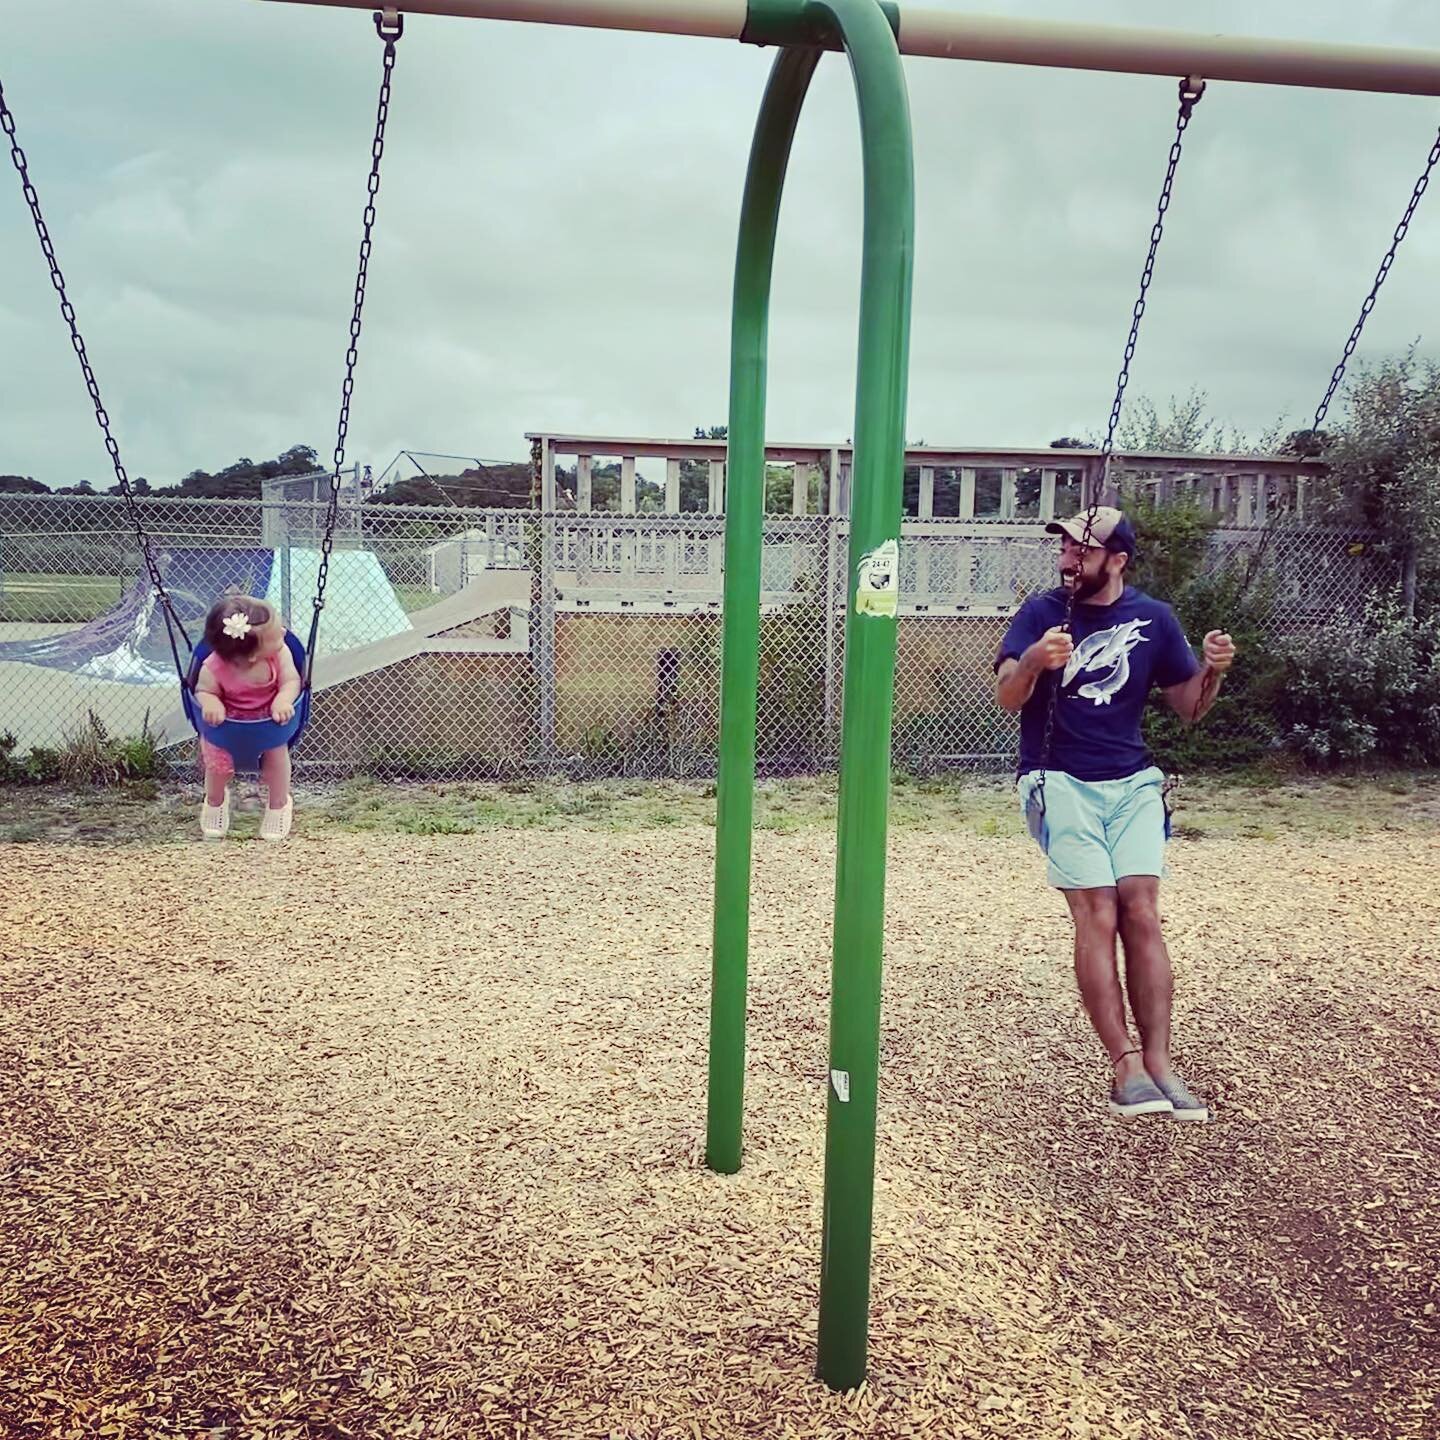 Step One: Volunteer to swing with niece. Step Two: Reap Instagram attention  Step Three: Just wanted to swing on a swing all along